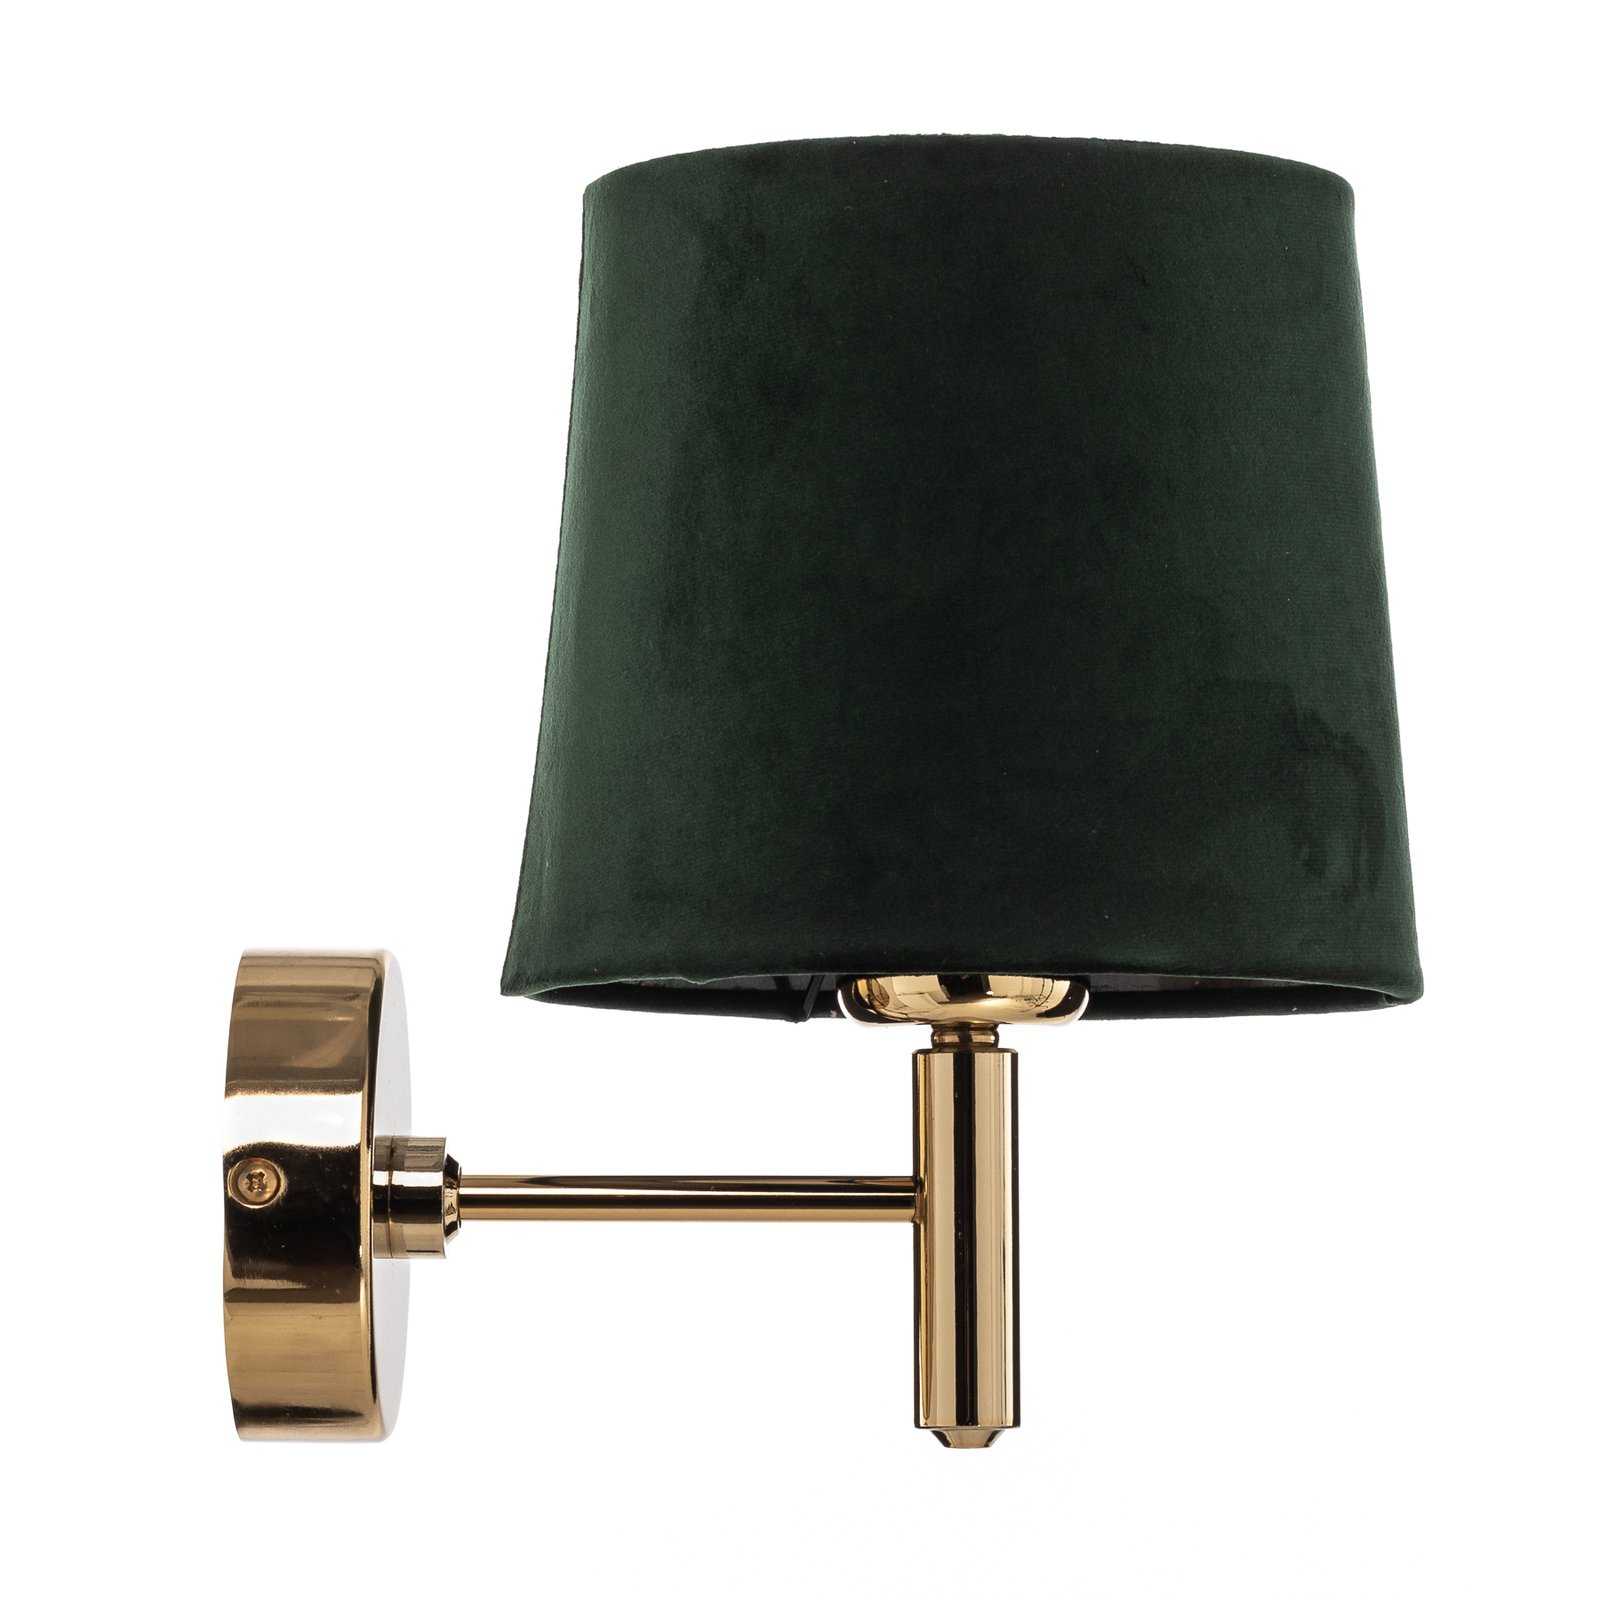 Wall light Polo Plus, textile shade, brass/green